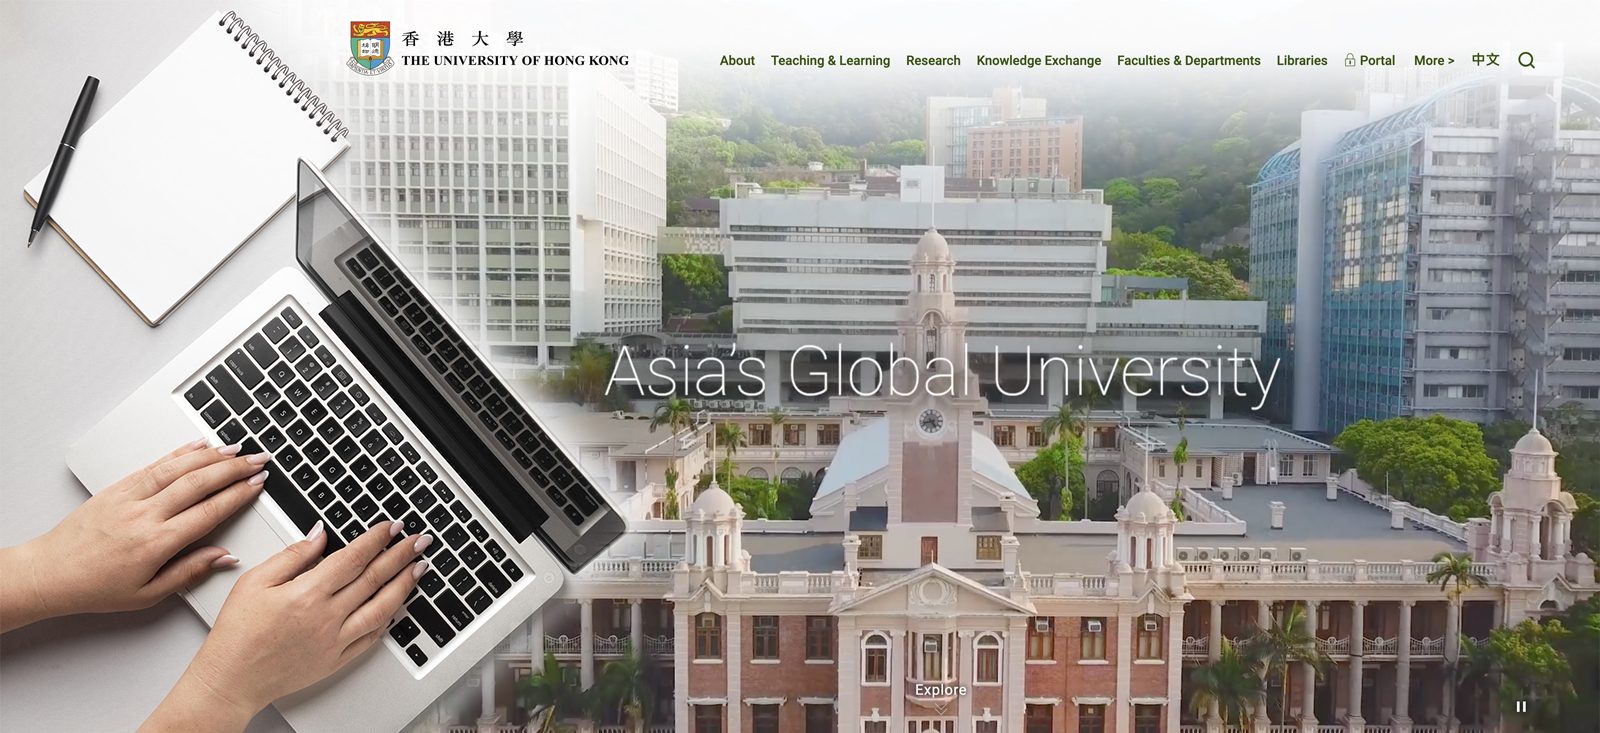 Help us build a better HKU website experience for you!